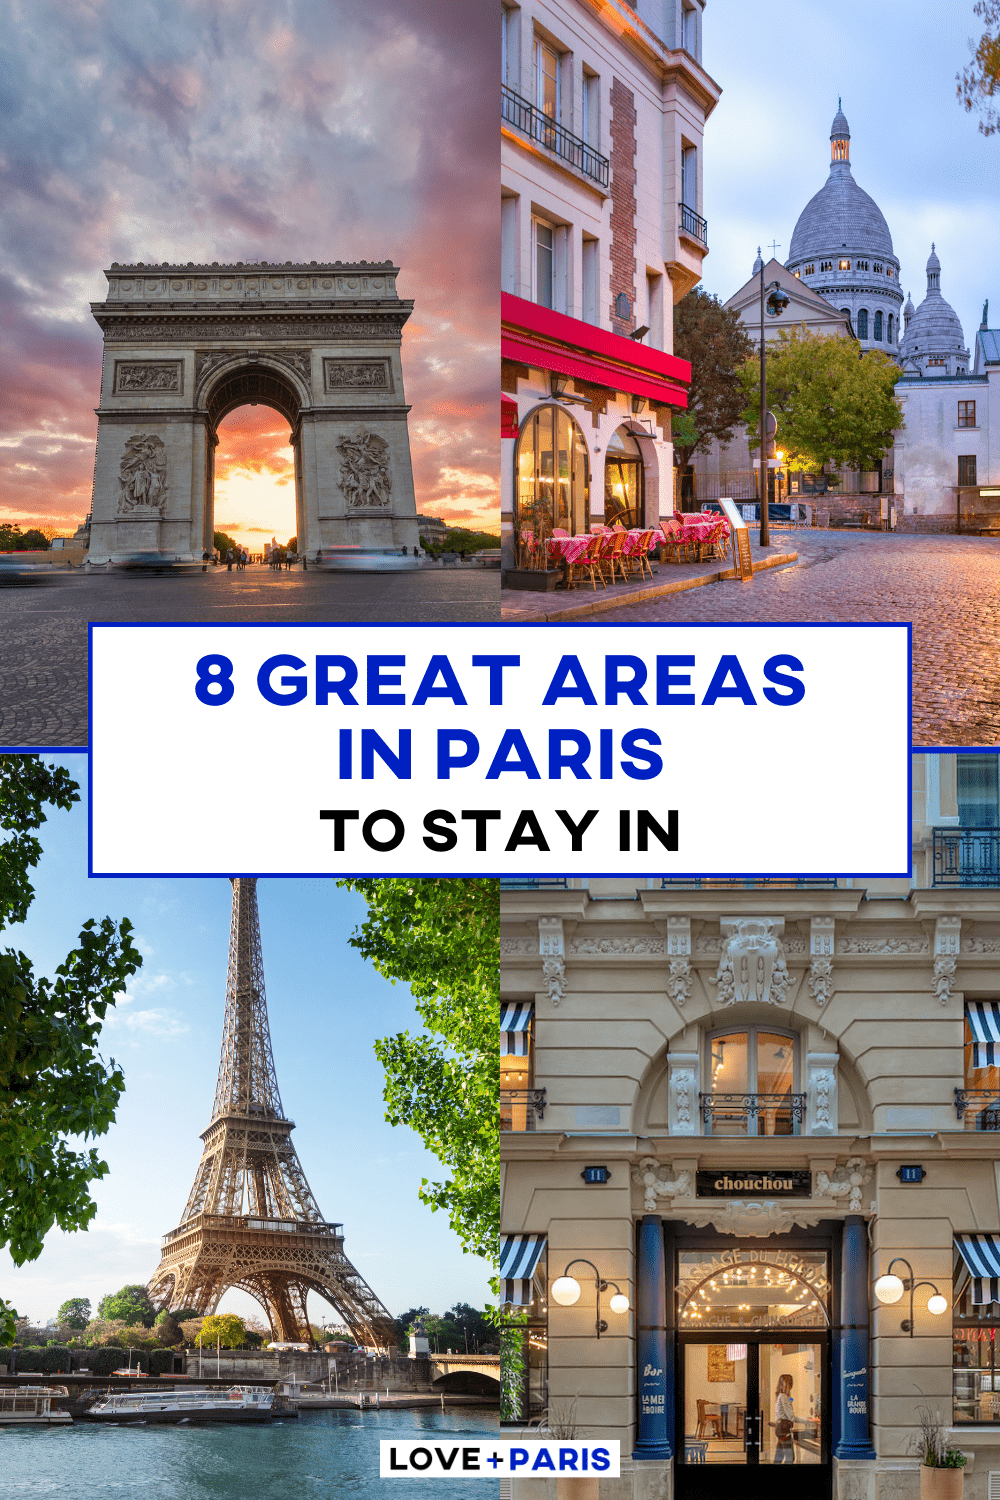 This is a pinterest pins of four images of different hotels and areas of Paris comprised into a grid format with a text box in the middle.